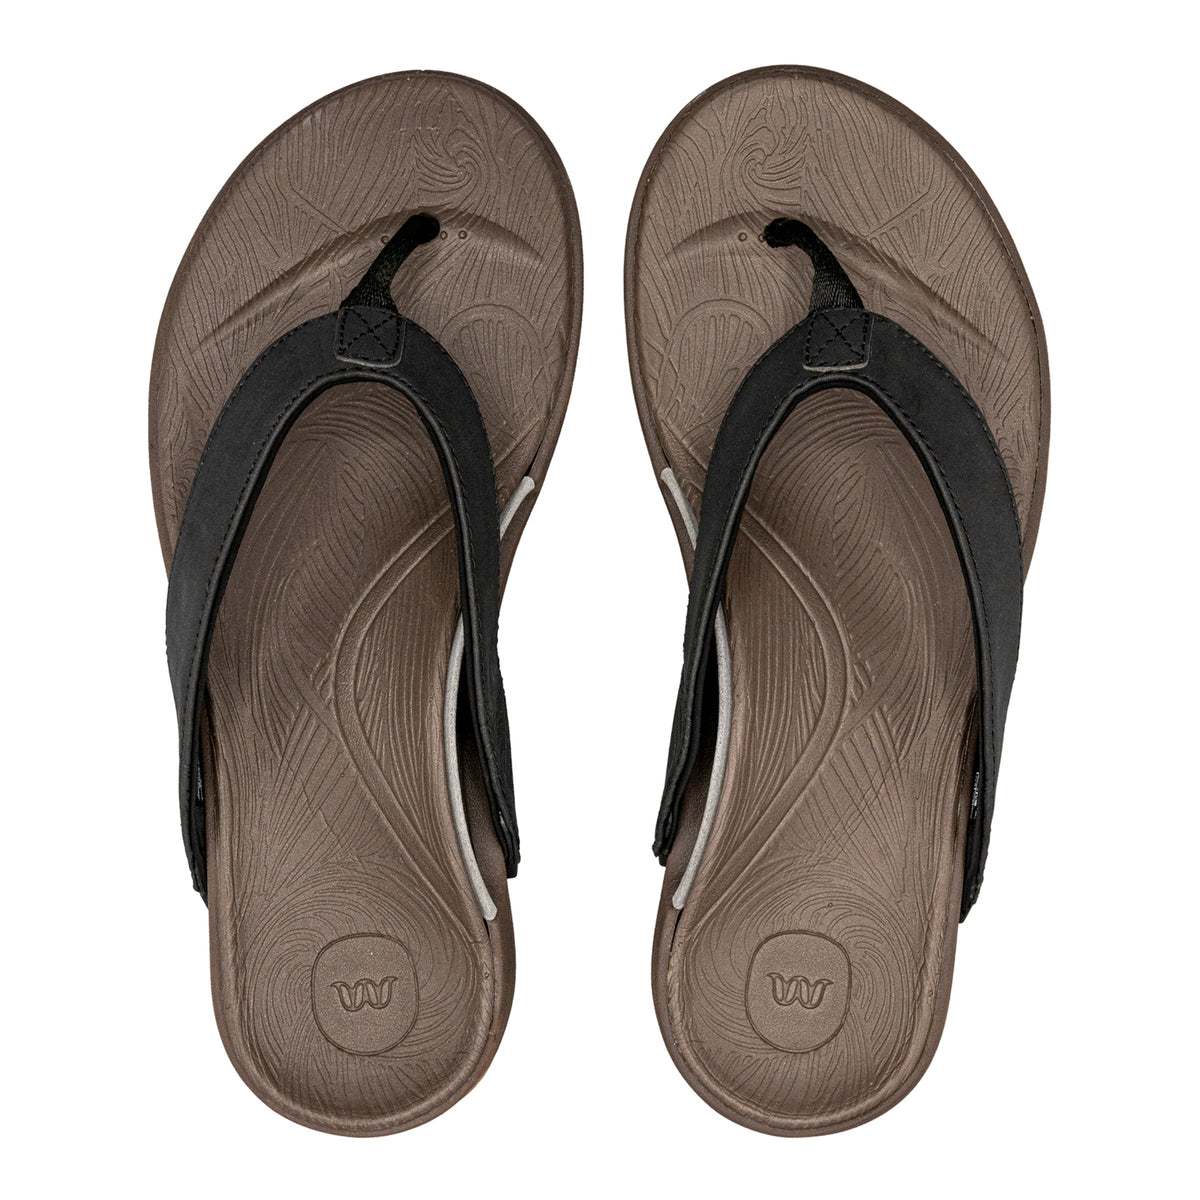 Reef San Onofre Flip Flop - Free Shipping